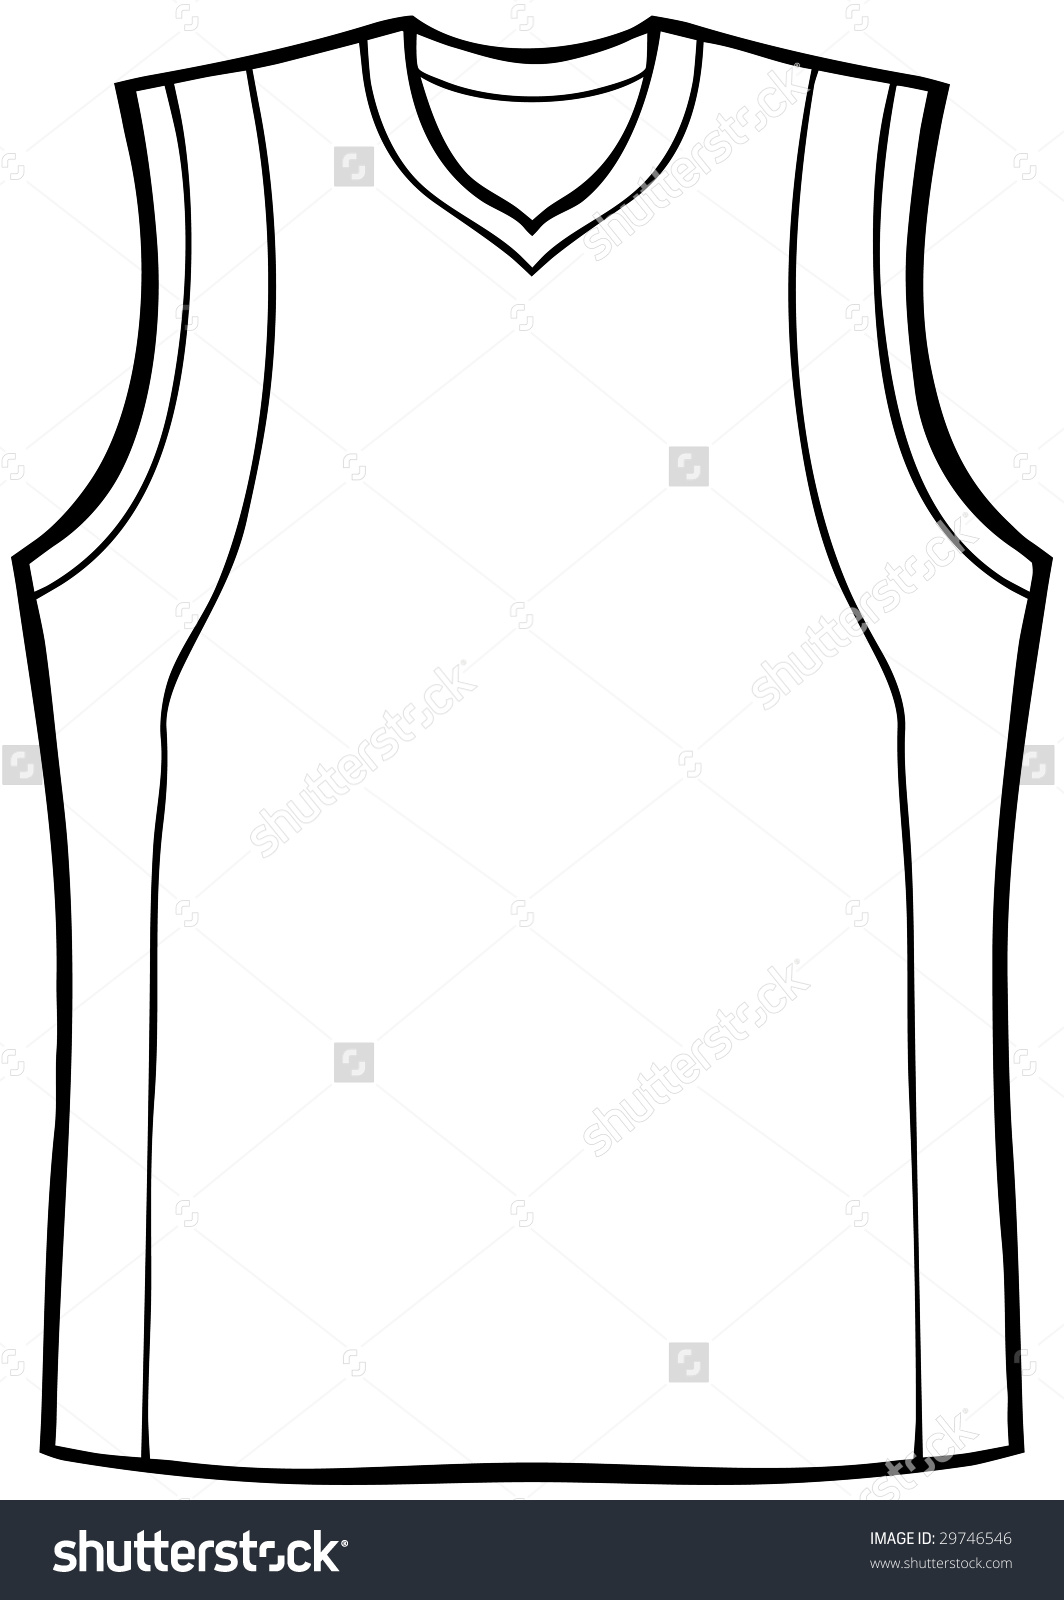 basketball jersey clipart 20 free Cliparts | Download images on ...